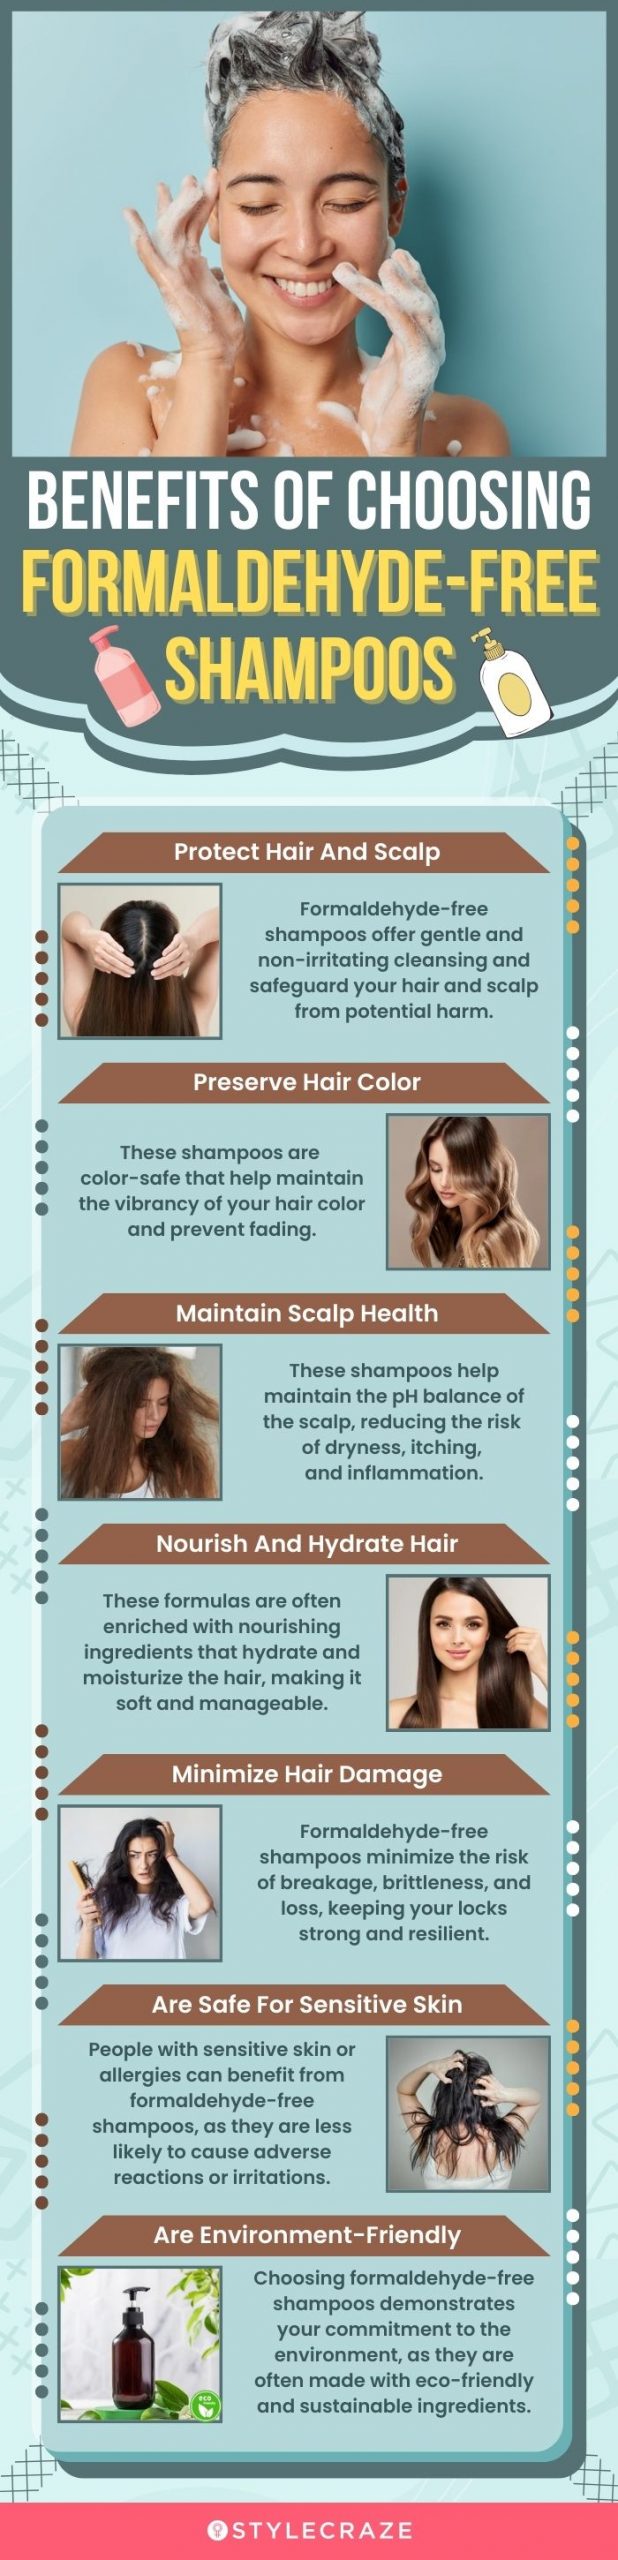 Benefits Of Choosing Formaldehyde-Free Shampoos (infographic)